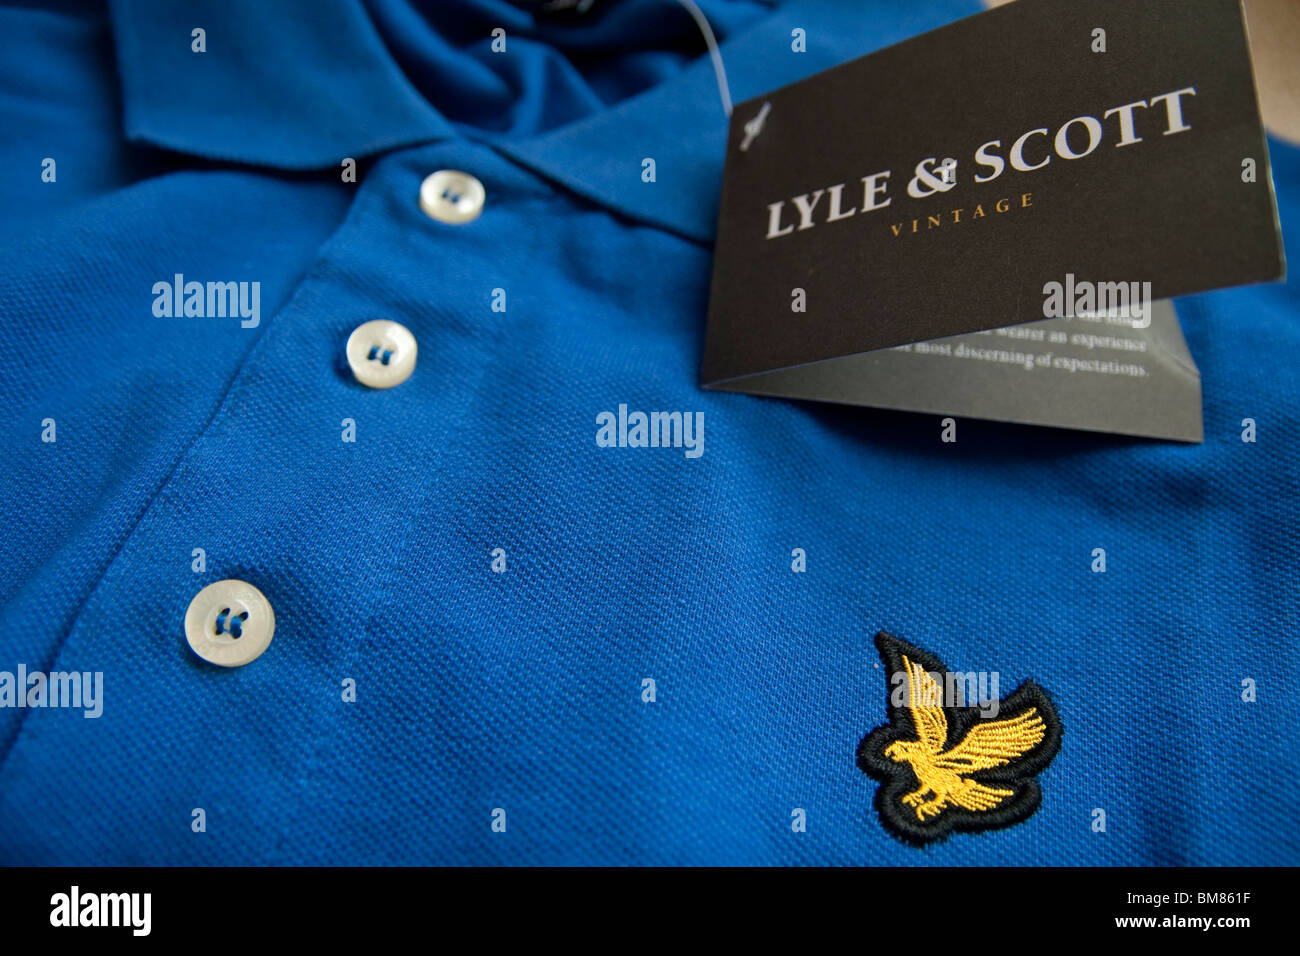 A blue Lyle & Scott polo t-shirt from the Vintage collection Stock Photo -  Alamy